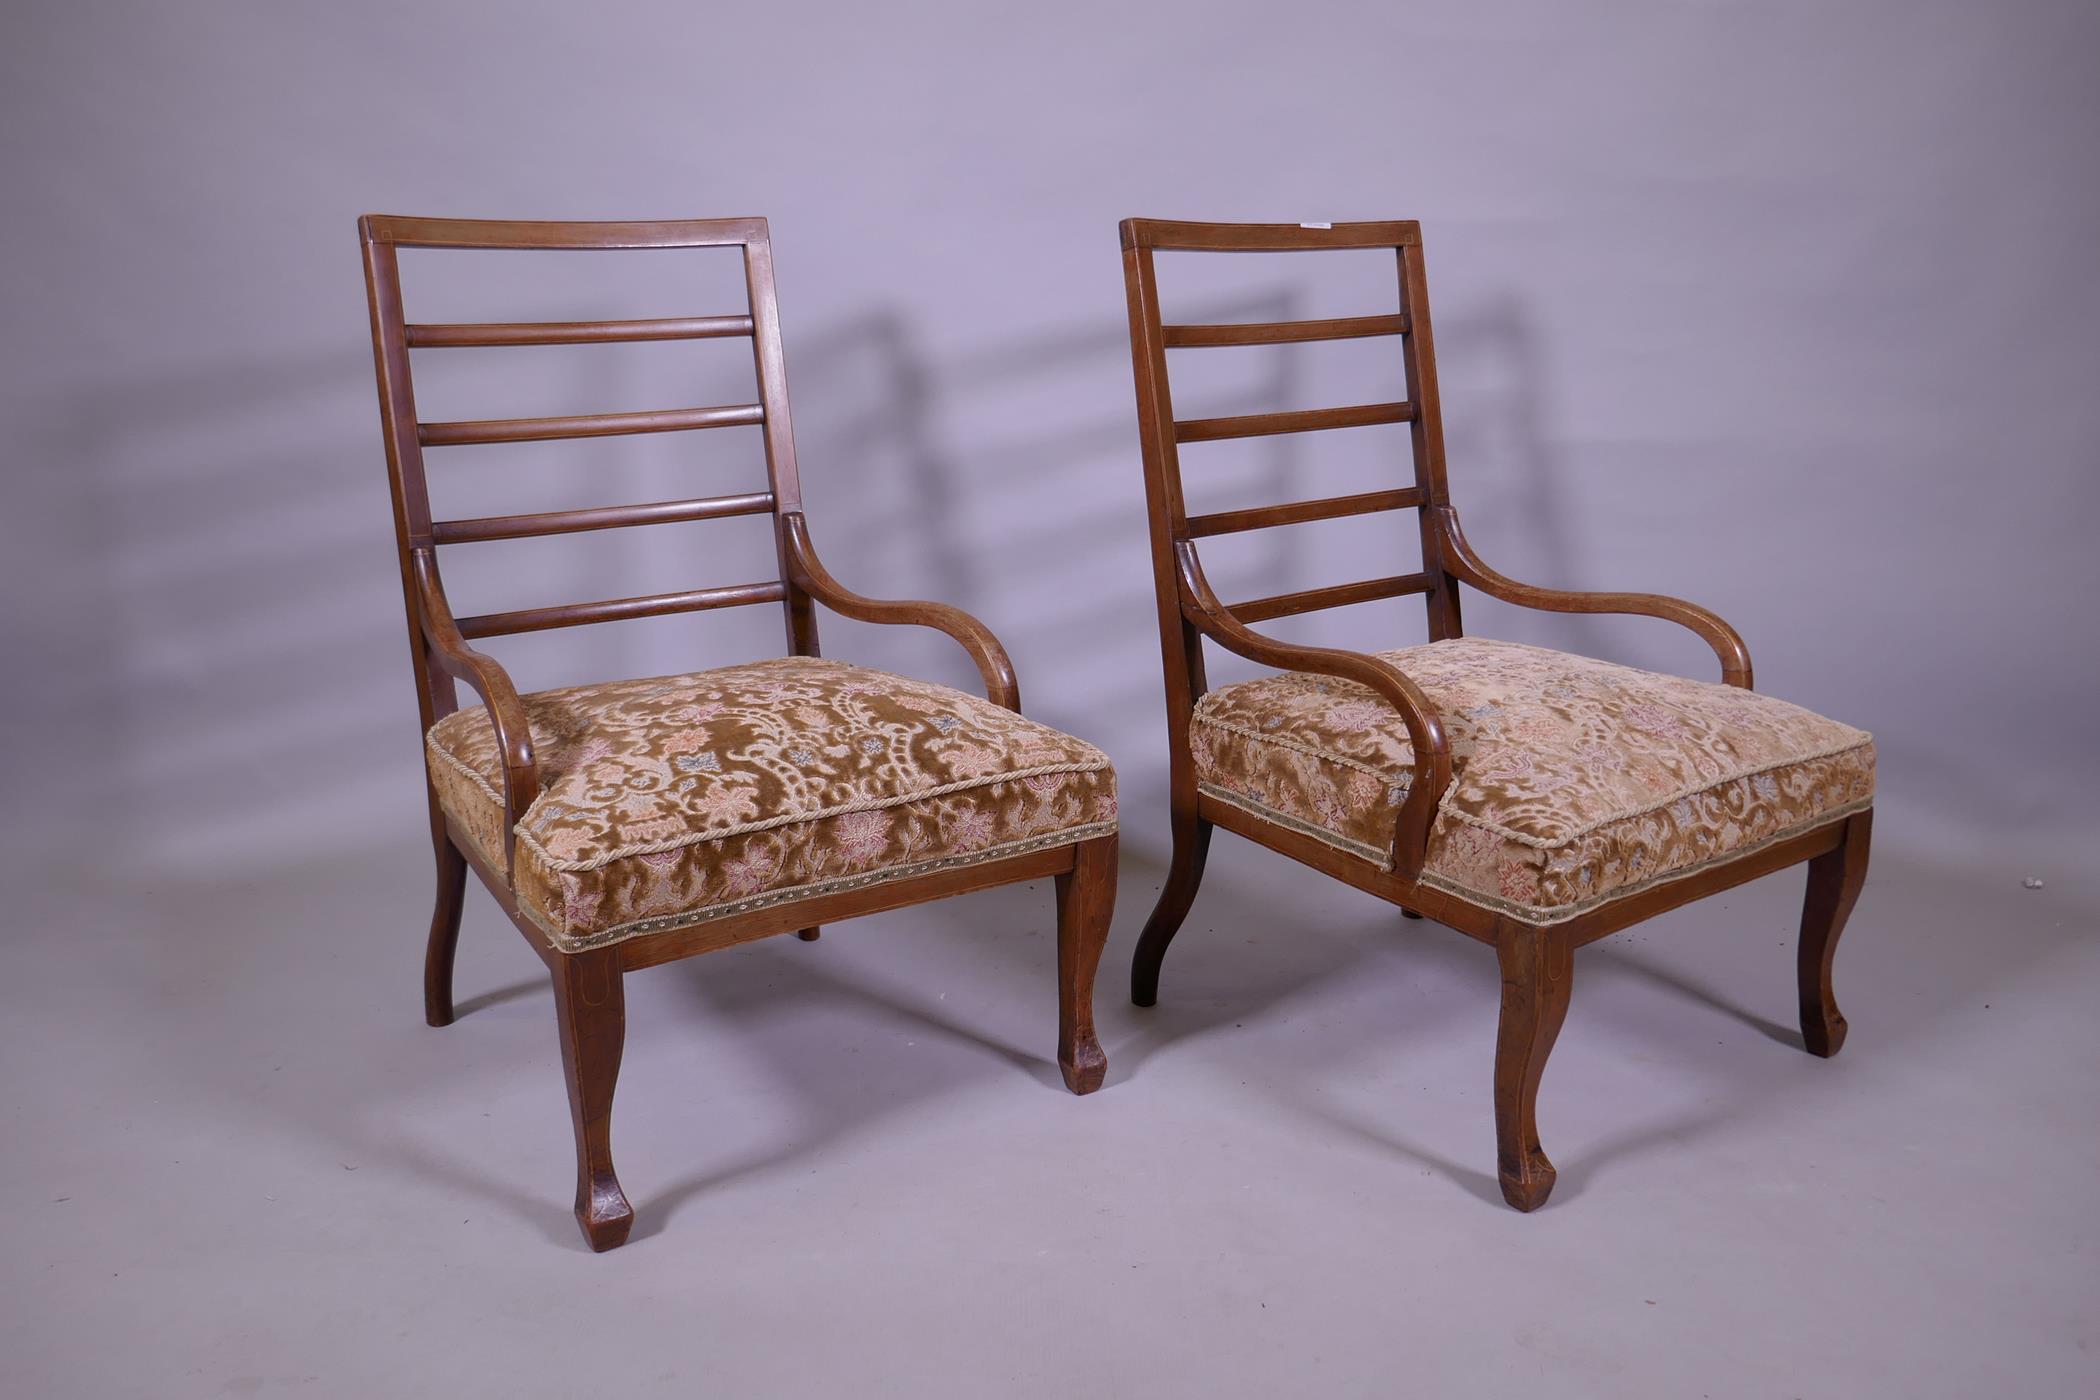 A pair of Edwardian inlaid walnut bedside/nursing chairs with ladder backs and open arms, raised - Image 2 of 3